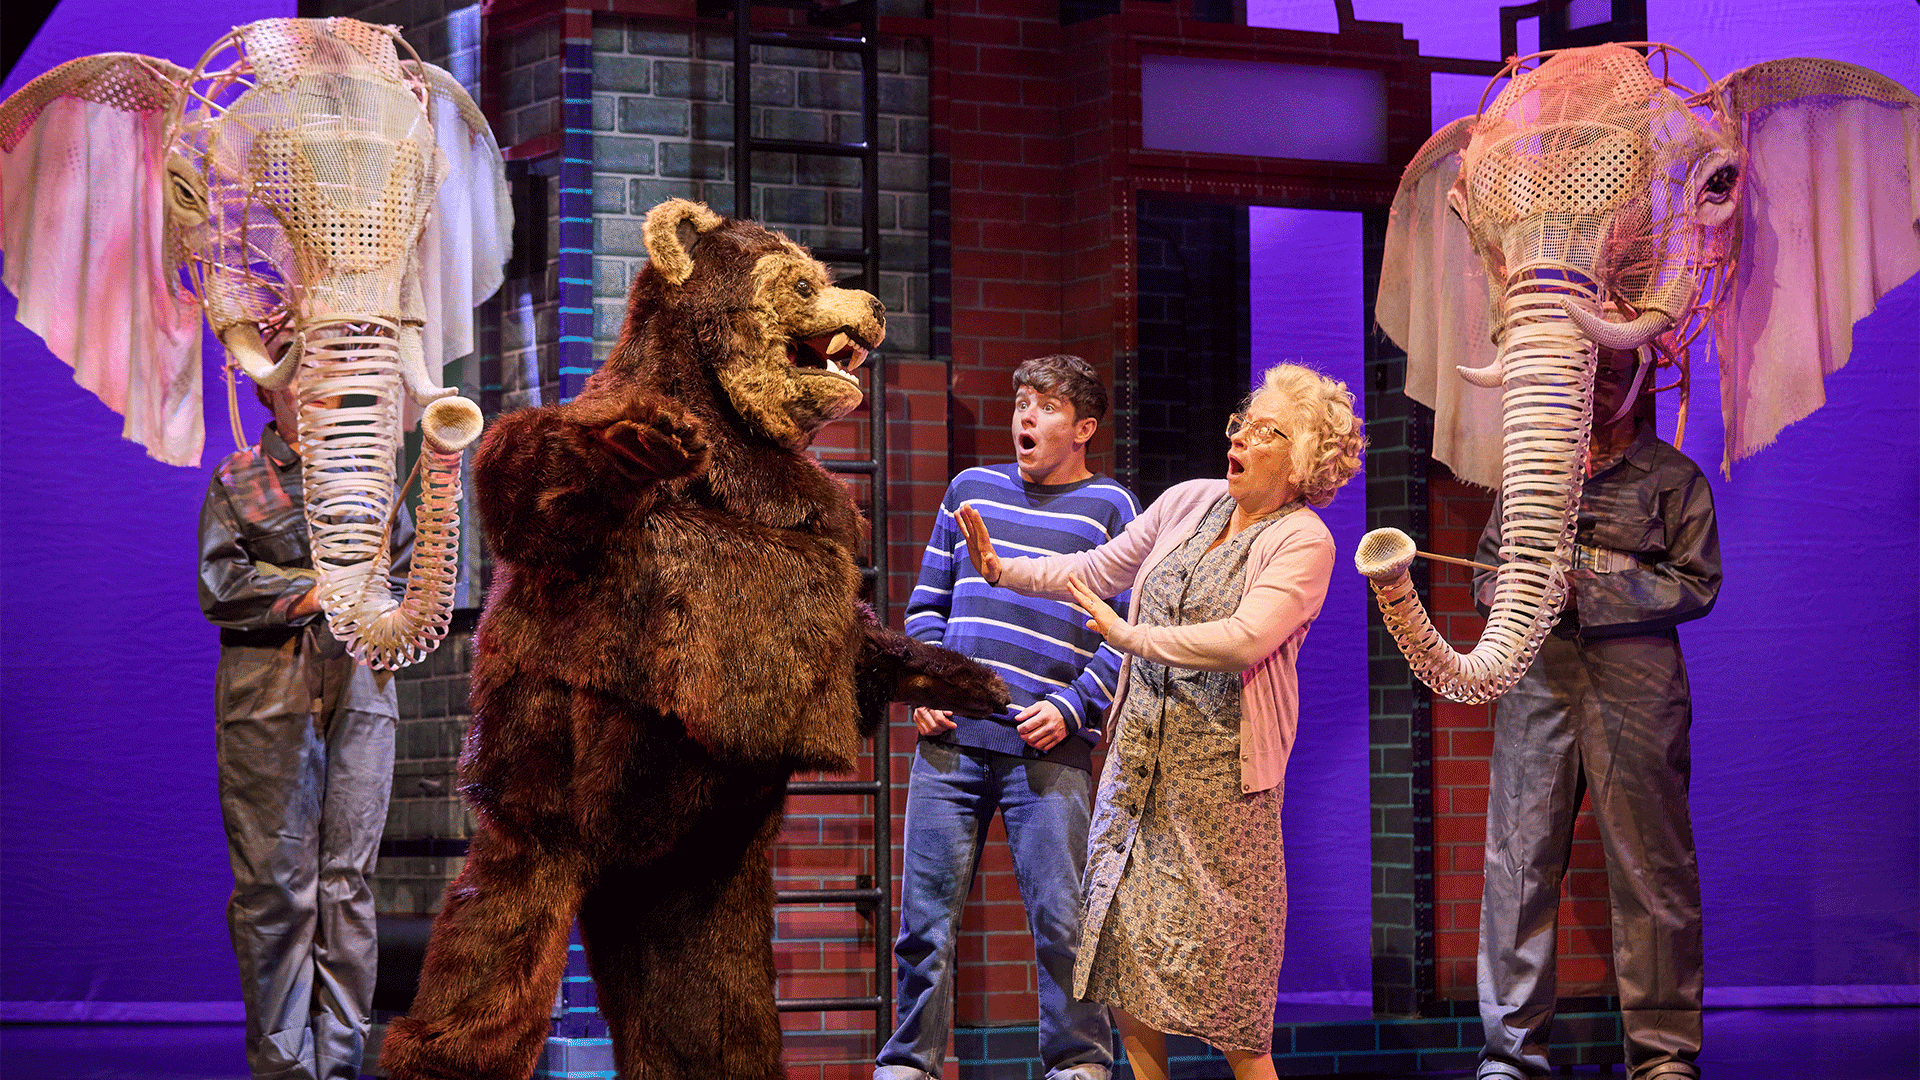 A young man and an older woman are startled by a large grizzly bear puppet. Two elephant puppets stand either side of this group.